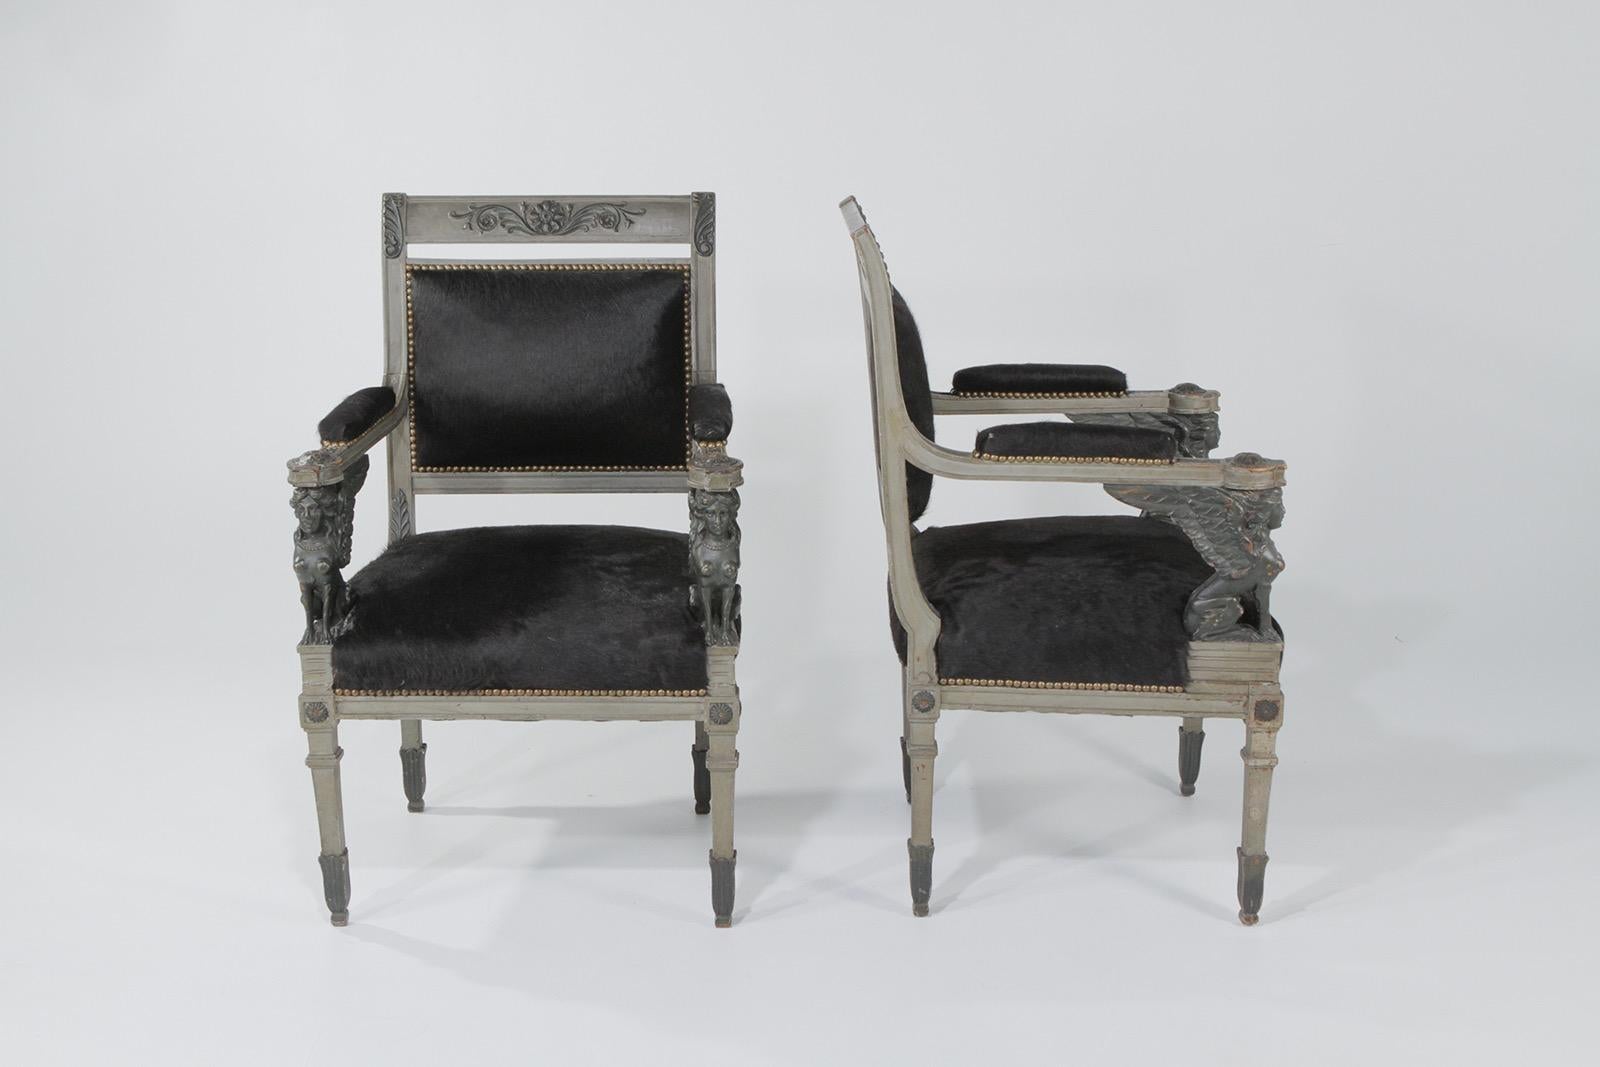 Superb Neoclassical Egyptian Revival Armchairs with Black Cowhide Upholstery 9